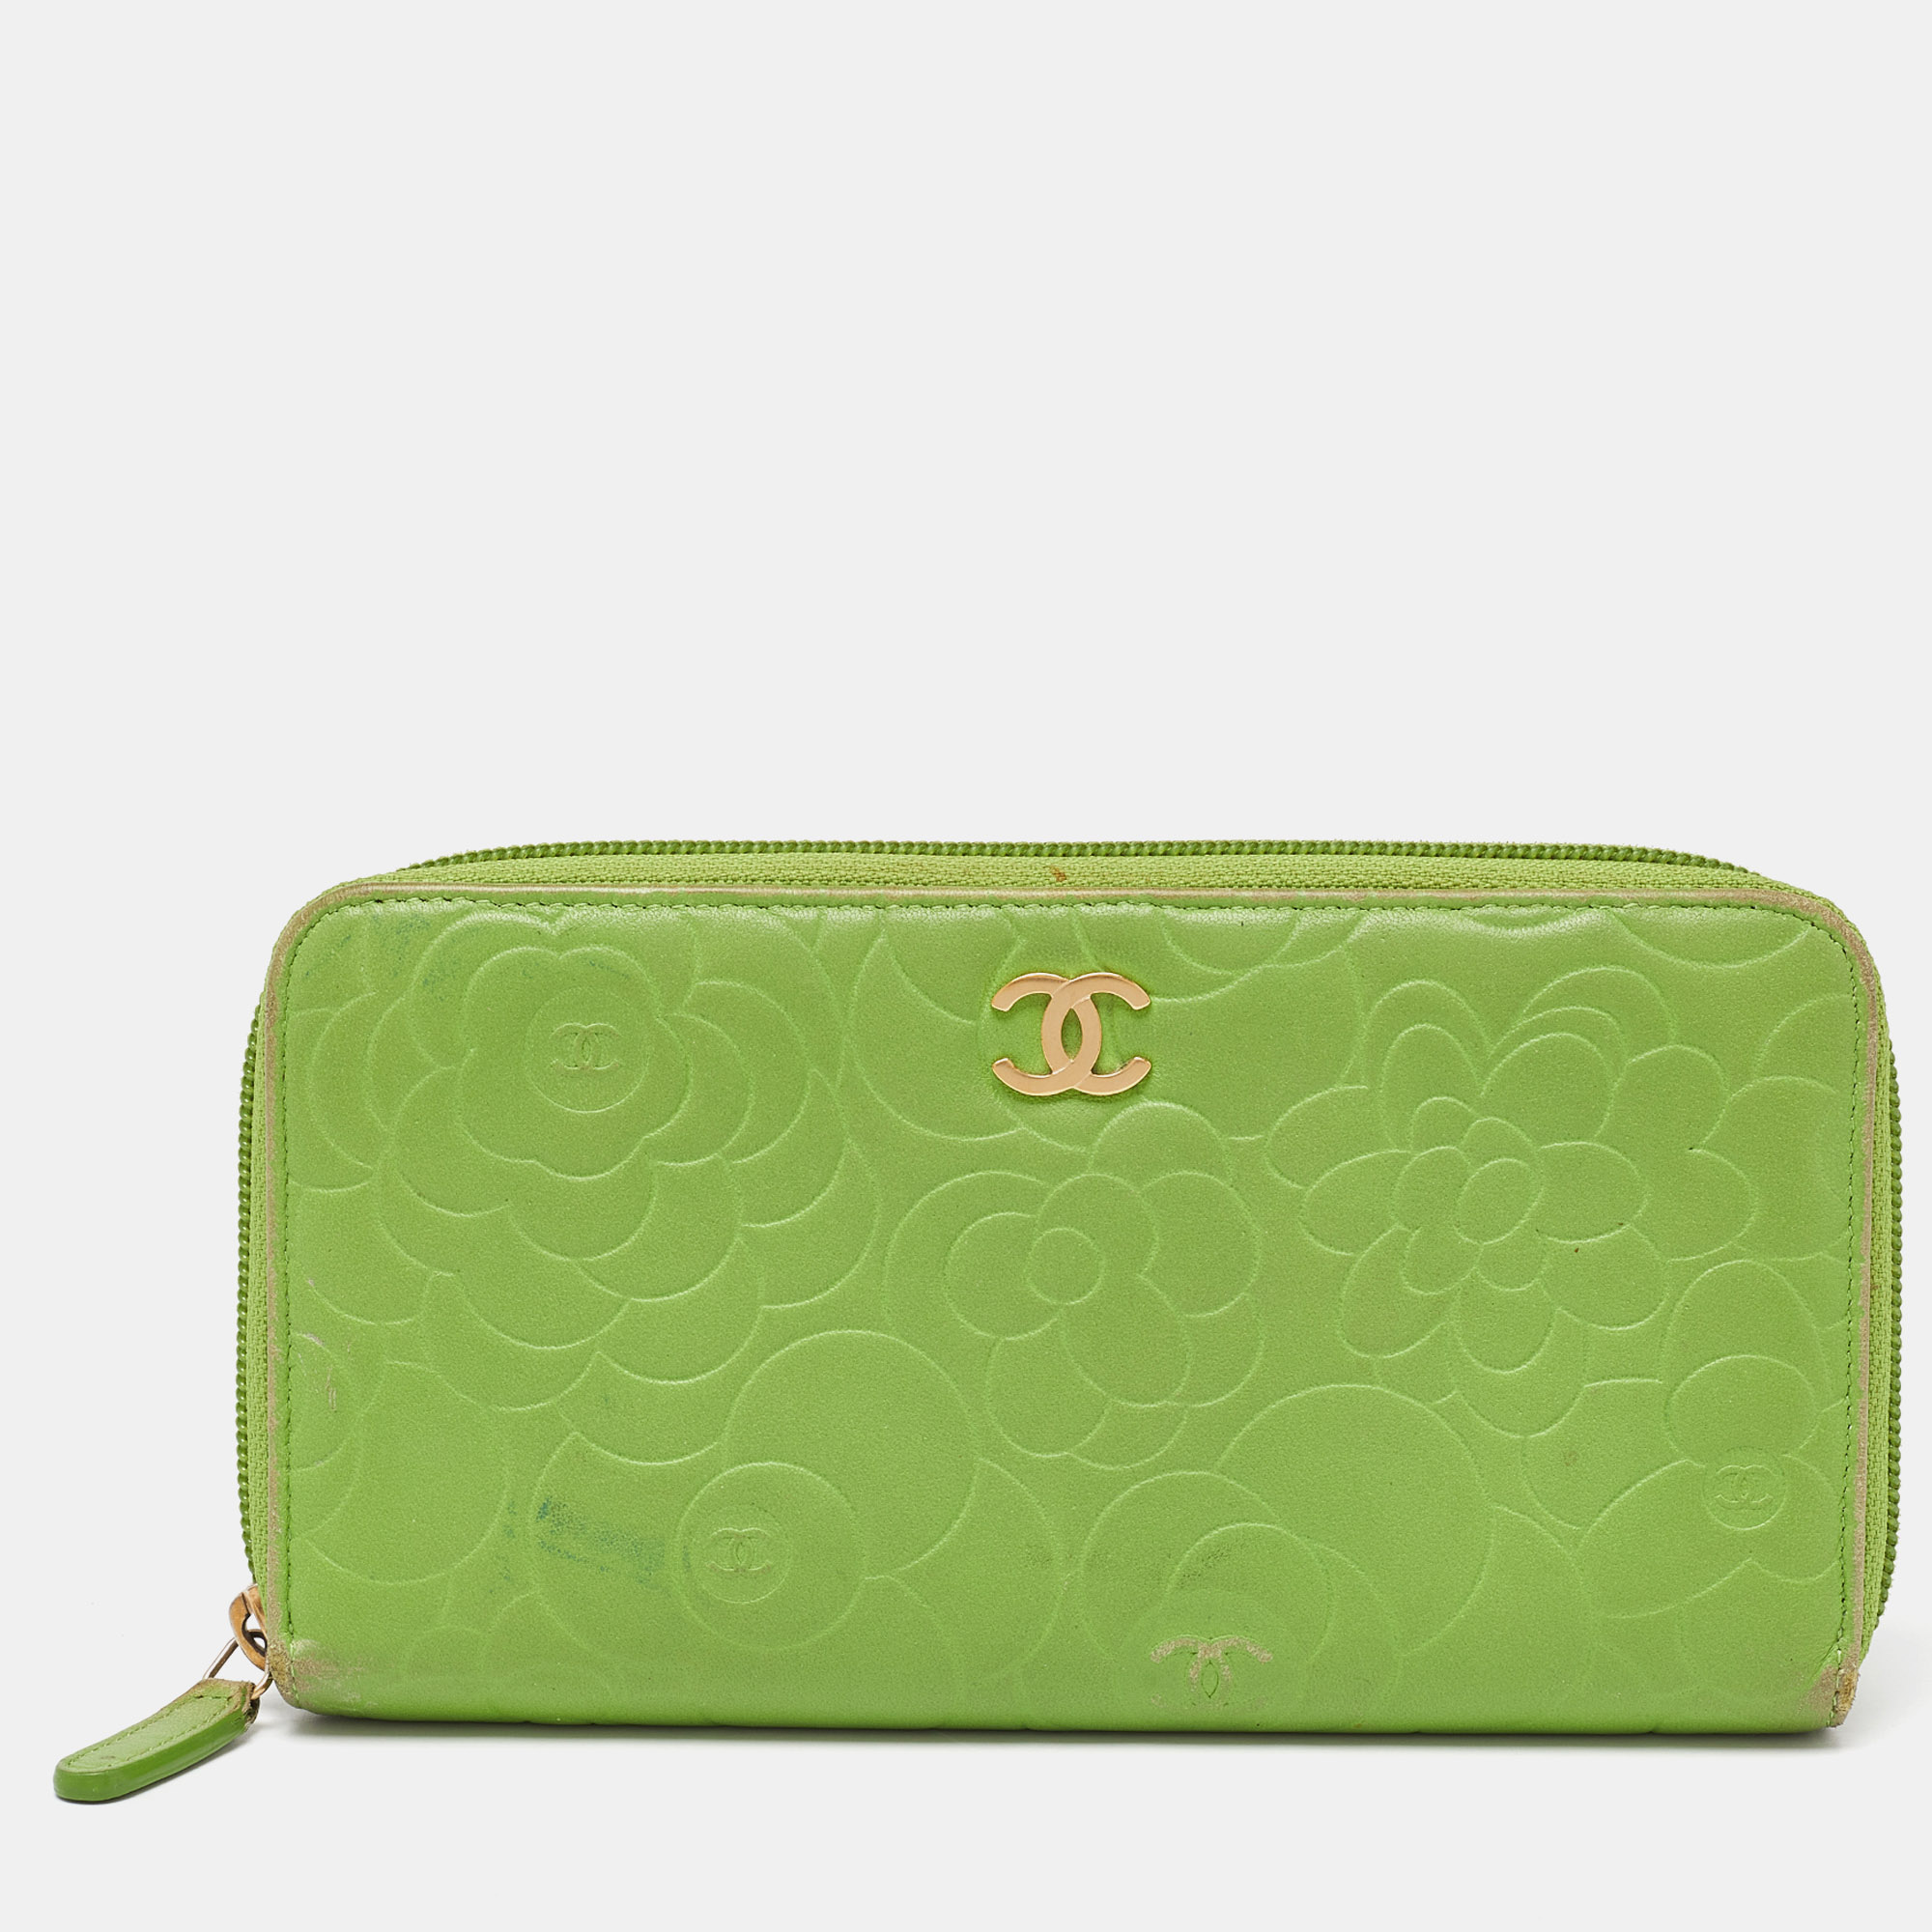 

Chanel Green Leather Camellia Zip Around Wallet